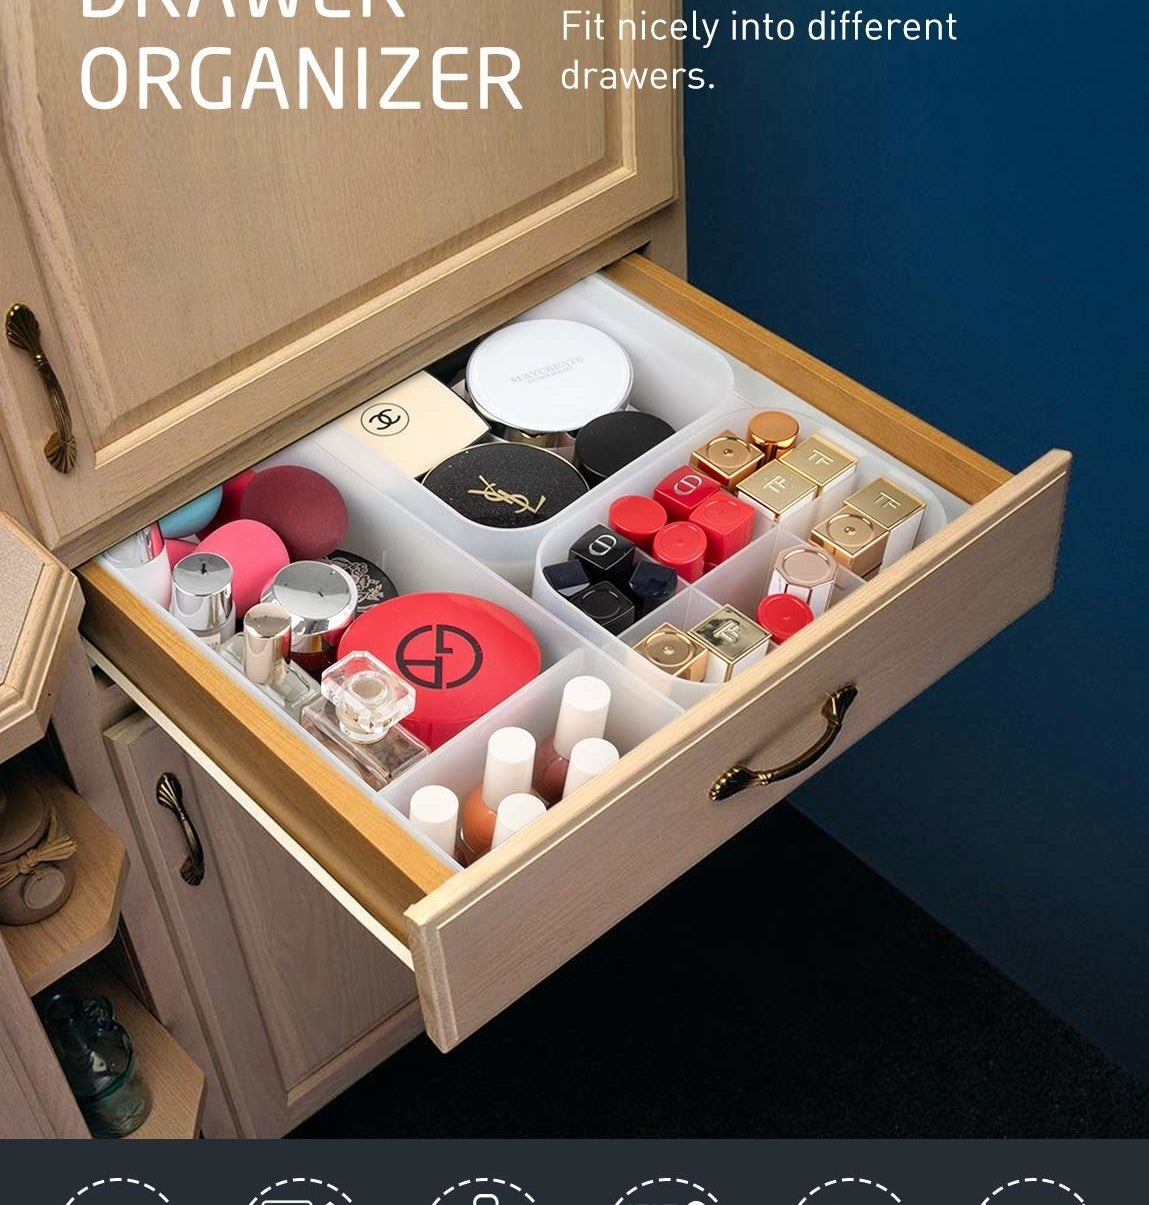 The organizer sitting snugly in an open drawer and filled with makeup products and perfumes